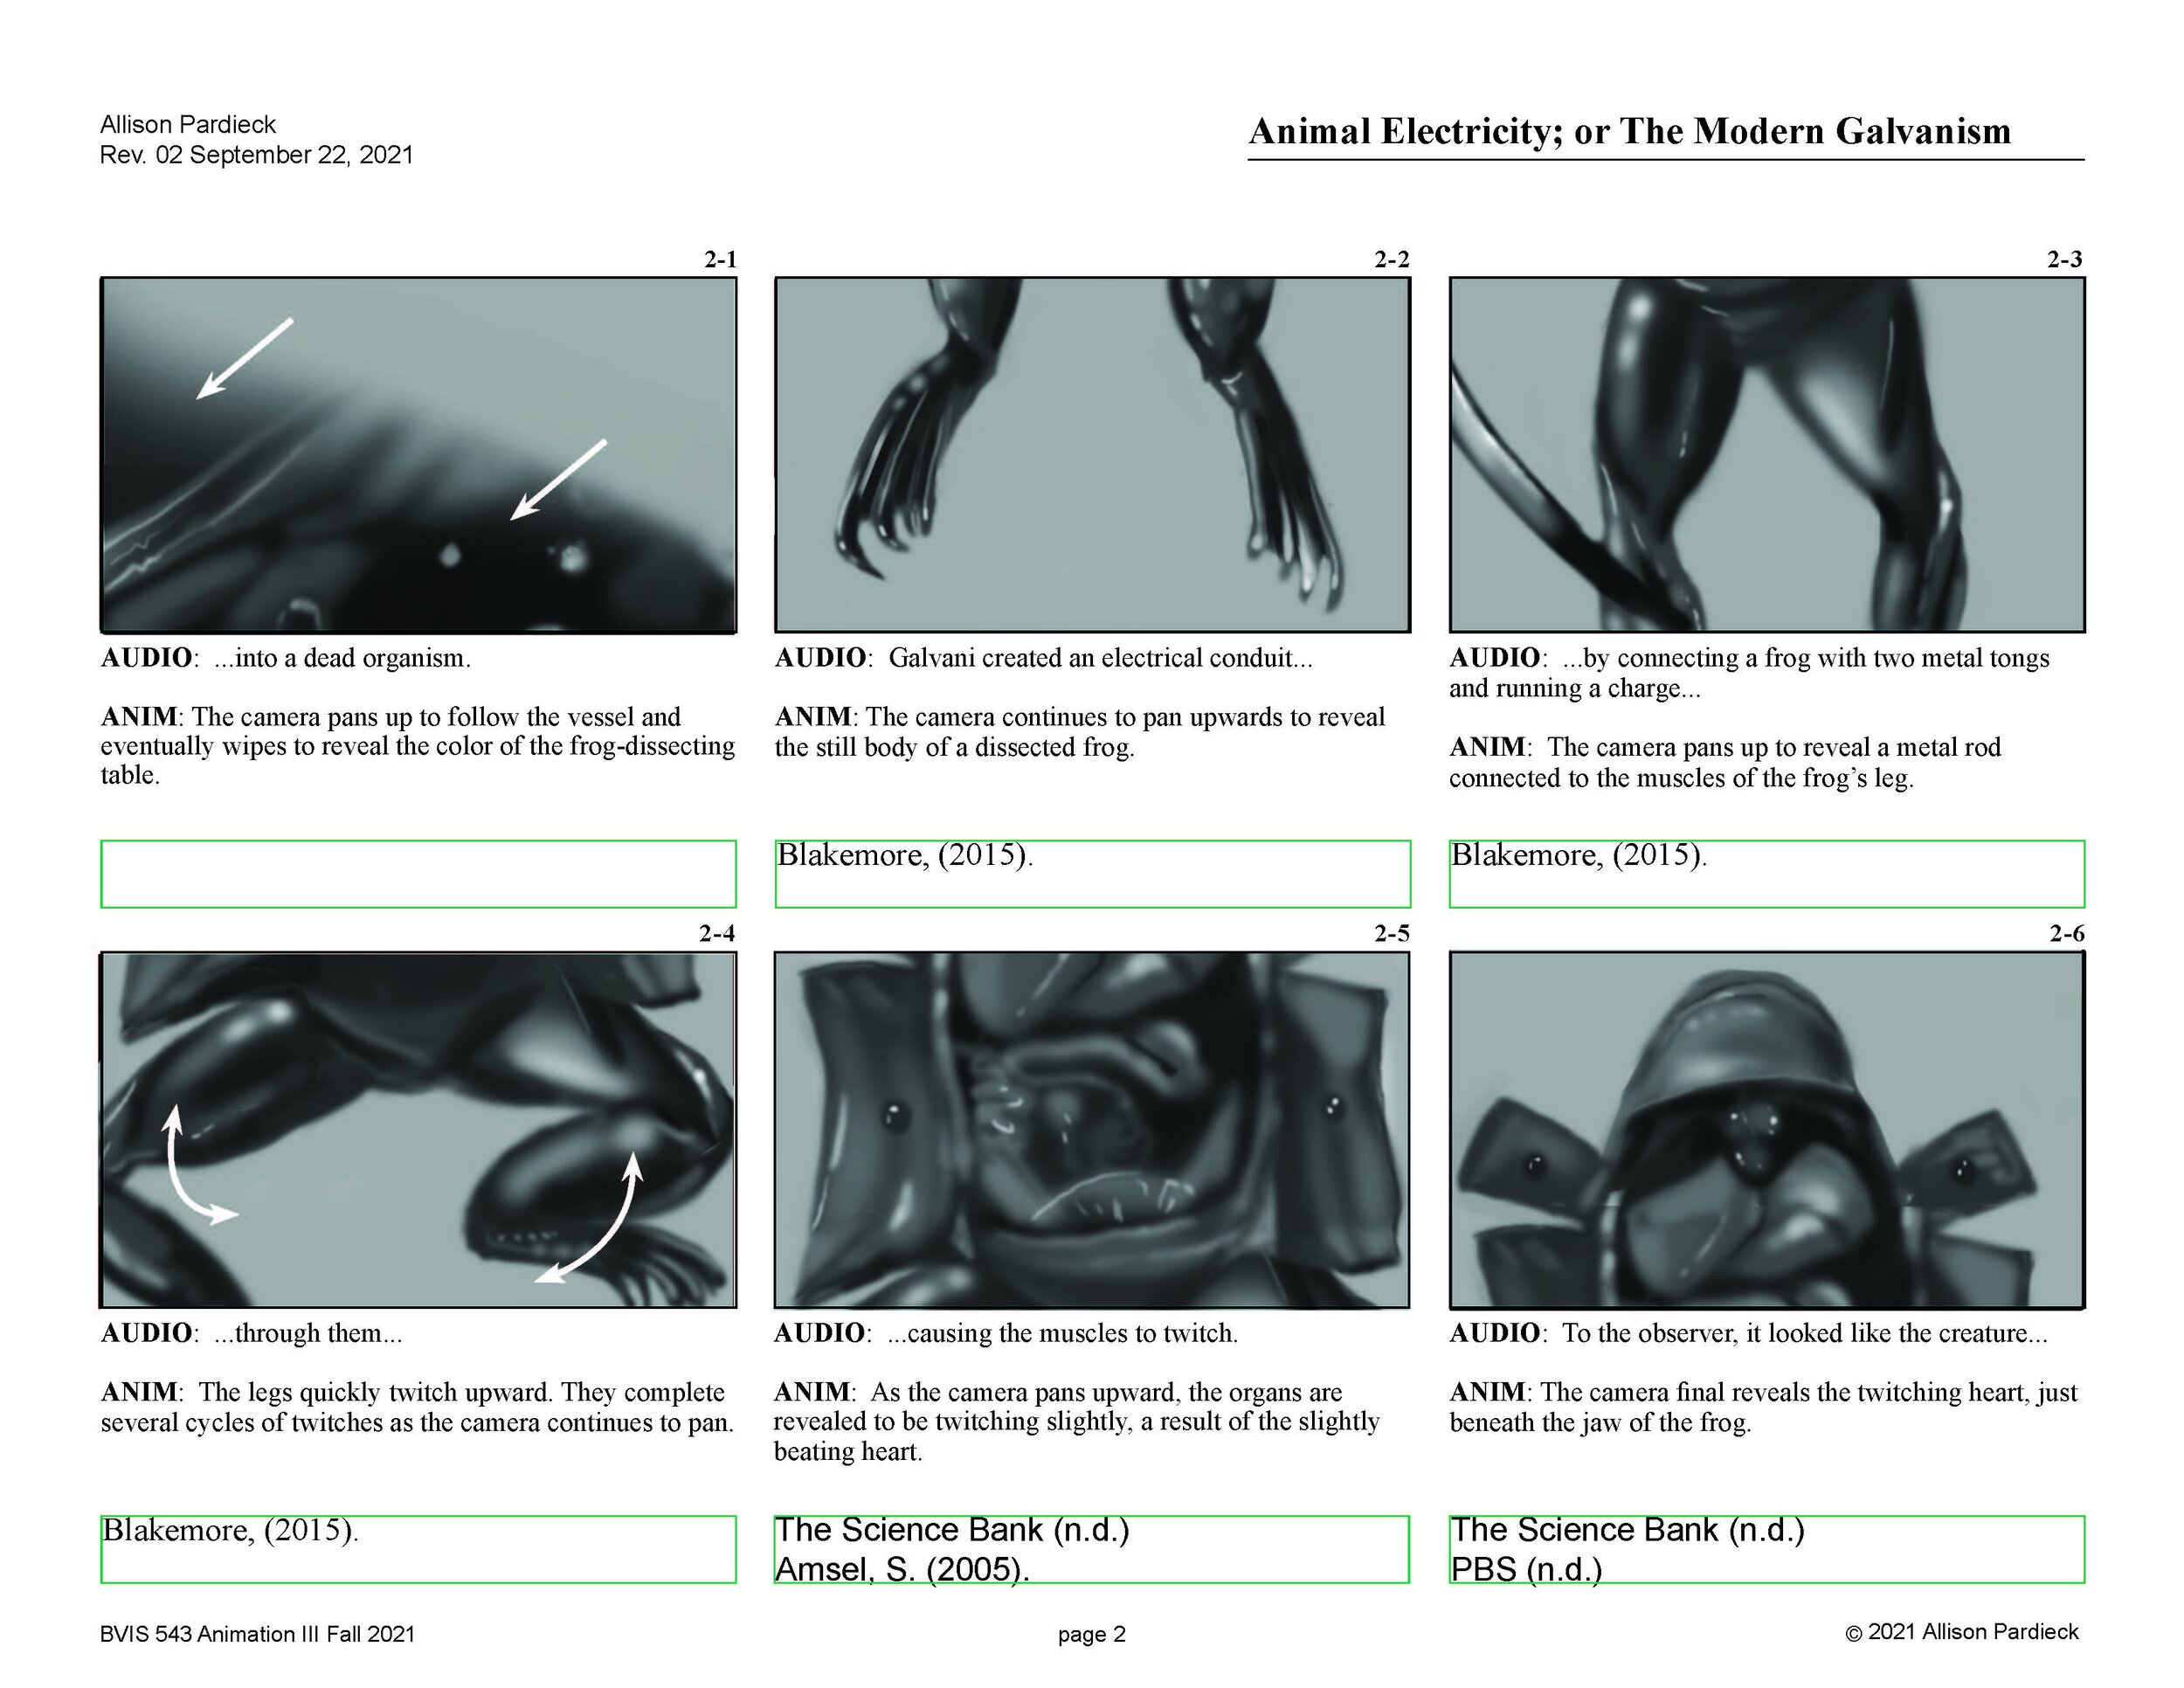 "Animal Electricity" Storyboards (page 2)